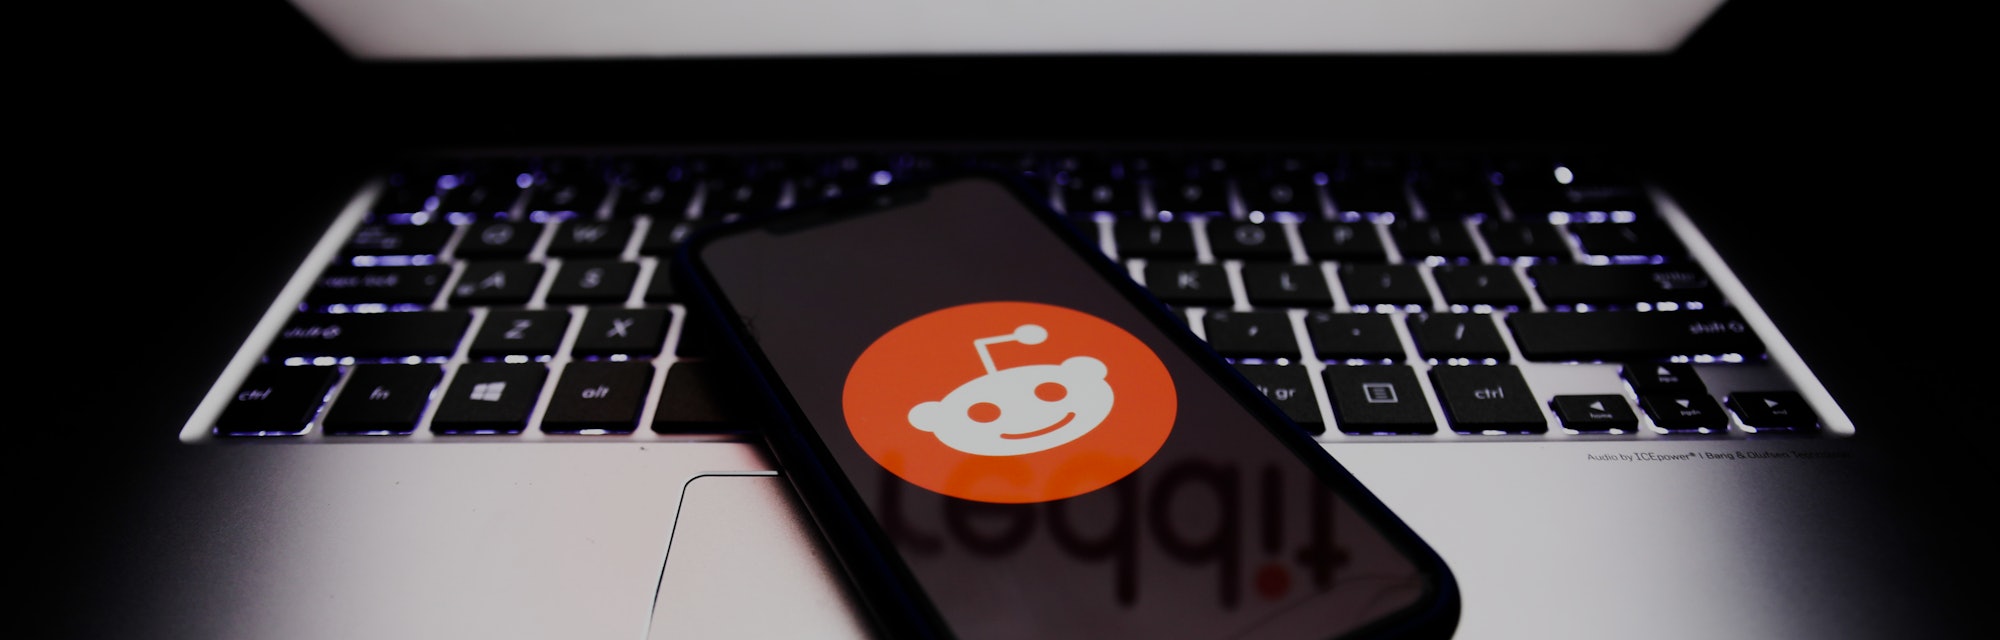 Reddit logos displayed on a phone and a laptop screens are seen in this illustration photo taken in ...